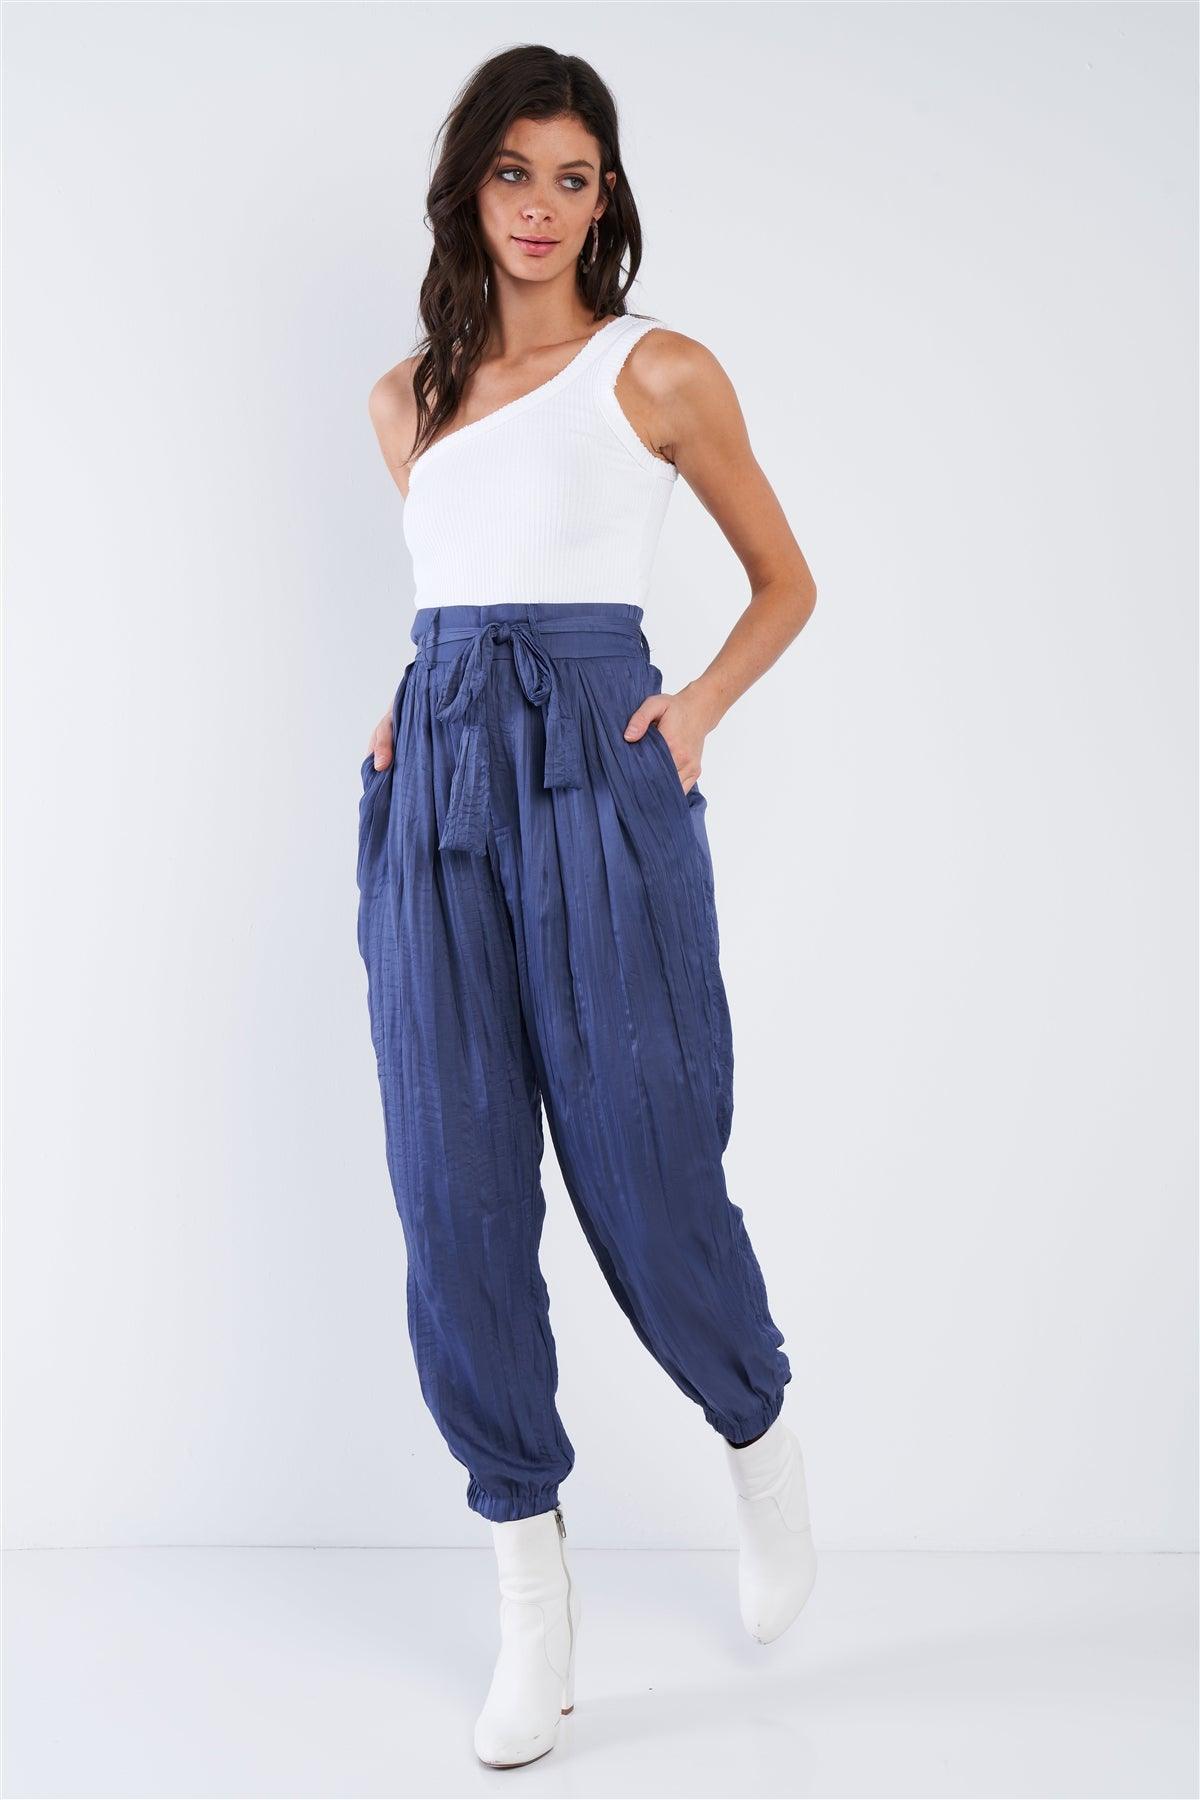 Indian Blue Crushed Satin Cinched Ankle Cuff Self Tie Waist Sash Pants /3-2-1